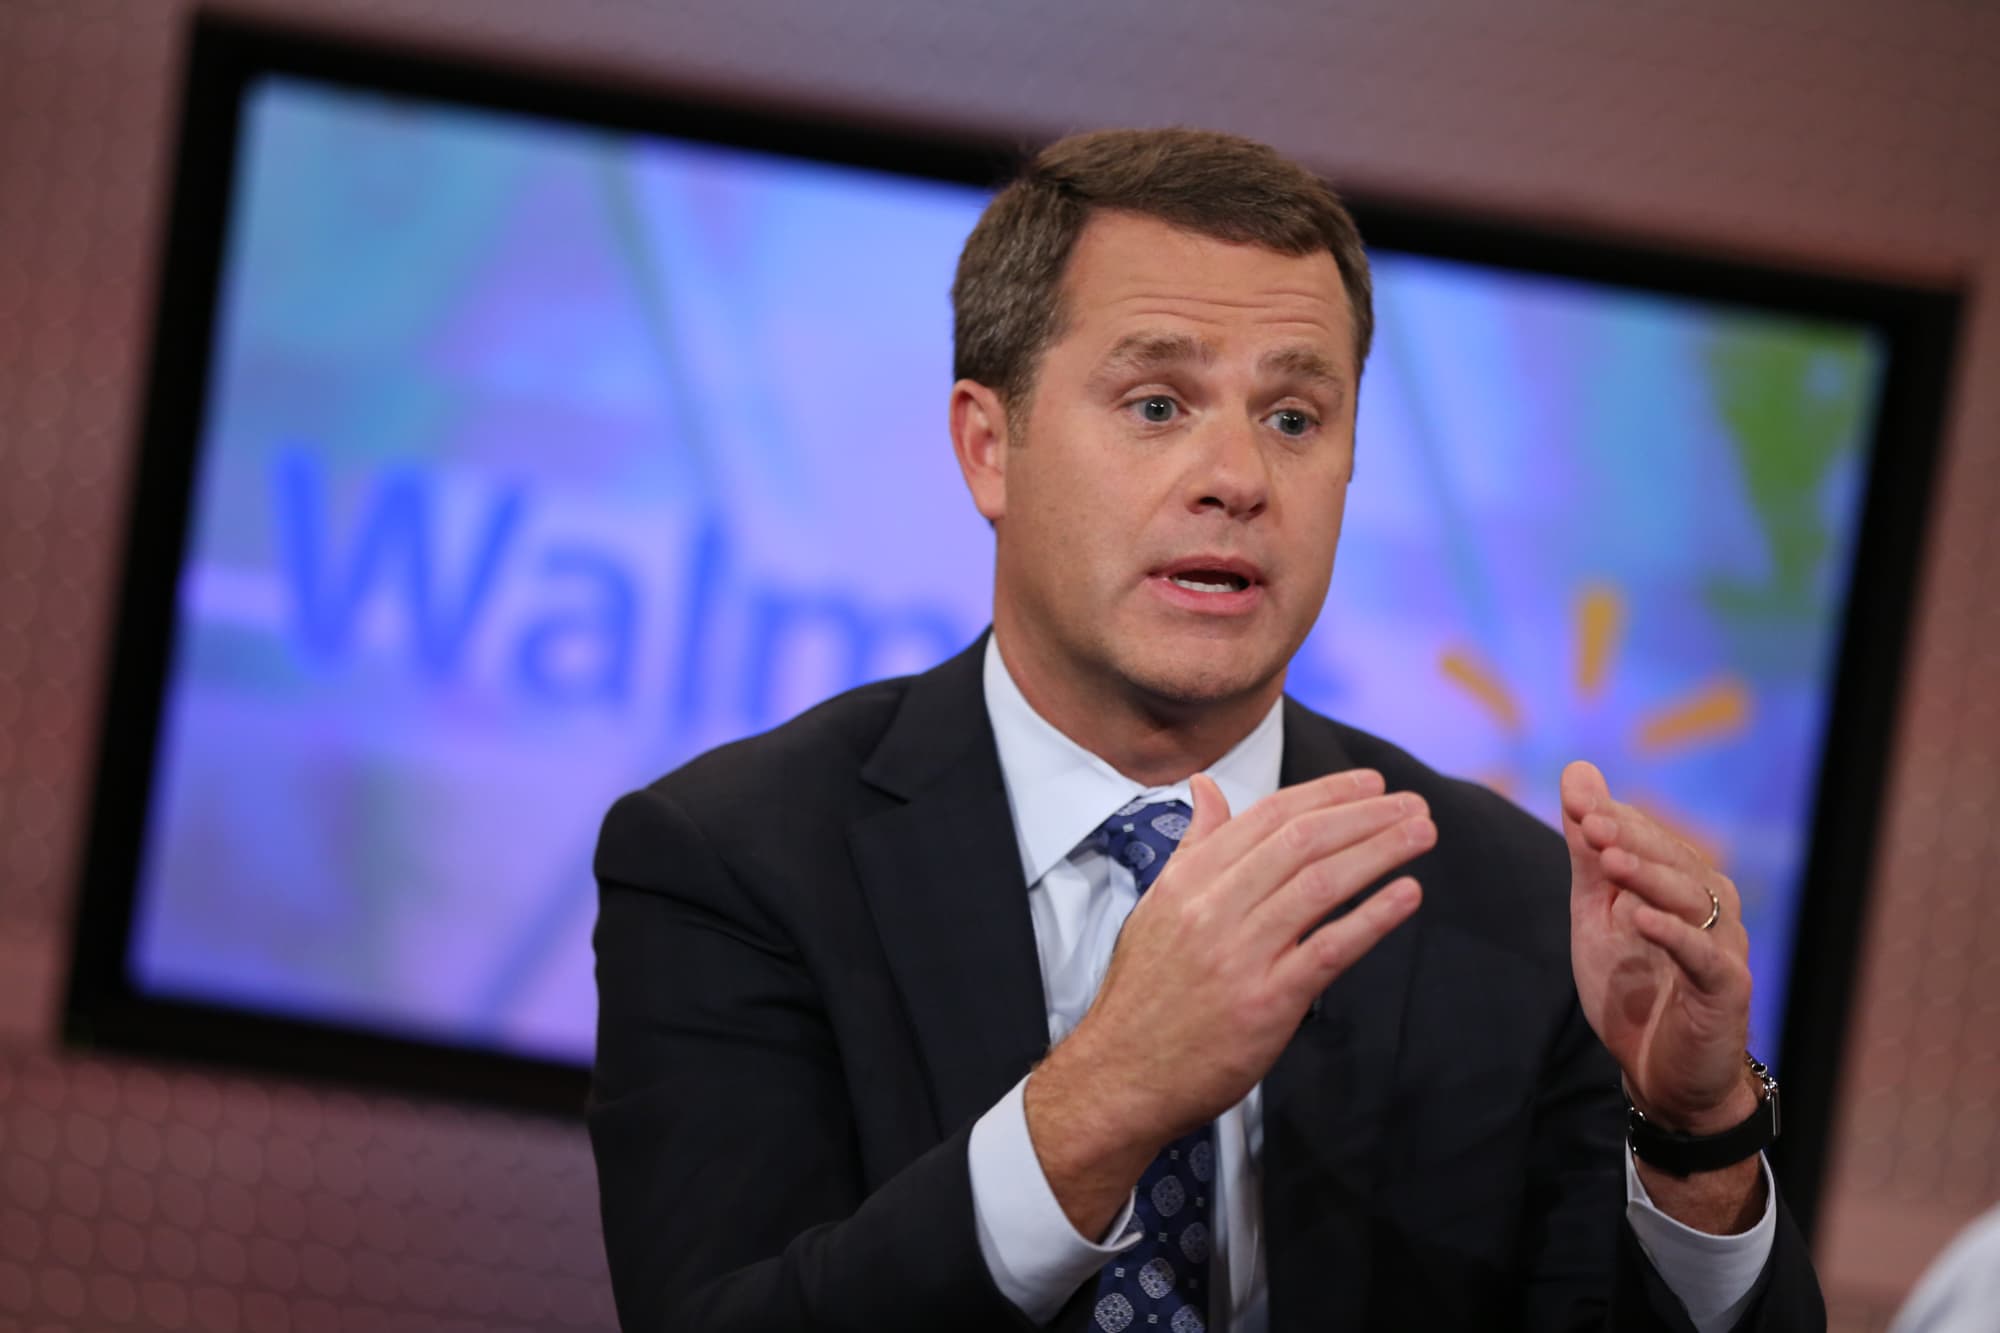 Walmart CEO Doug McMillon says focus is on Walmart+ expertise because it scales